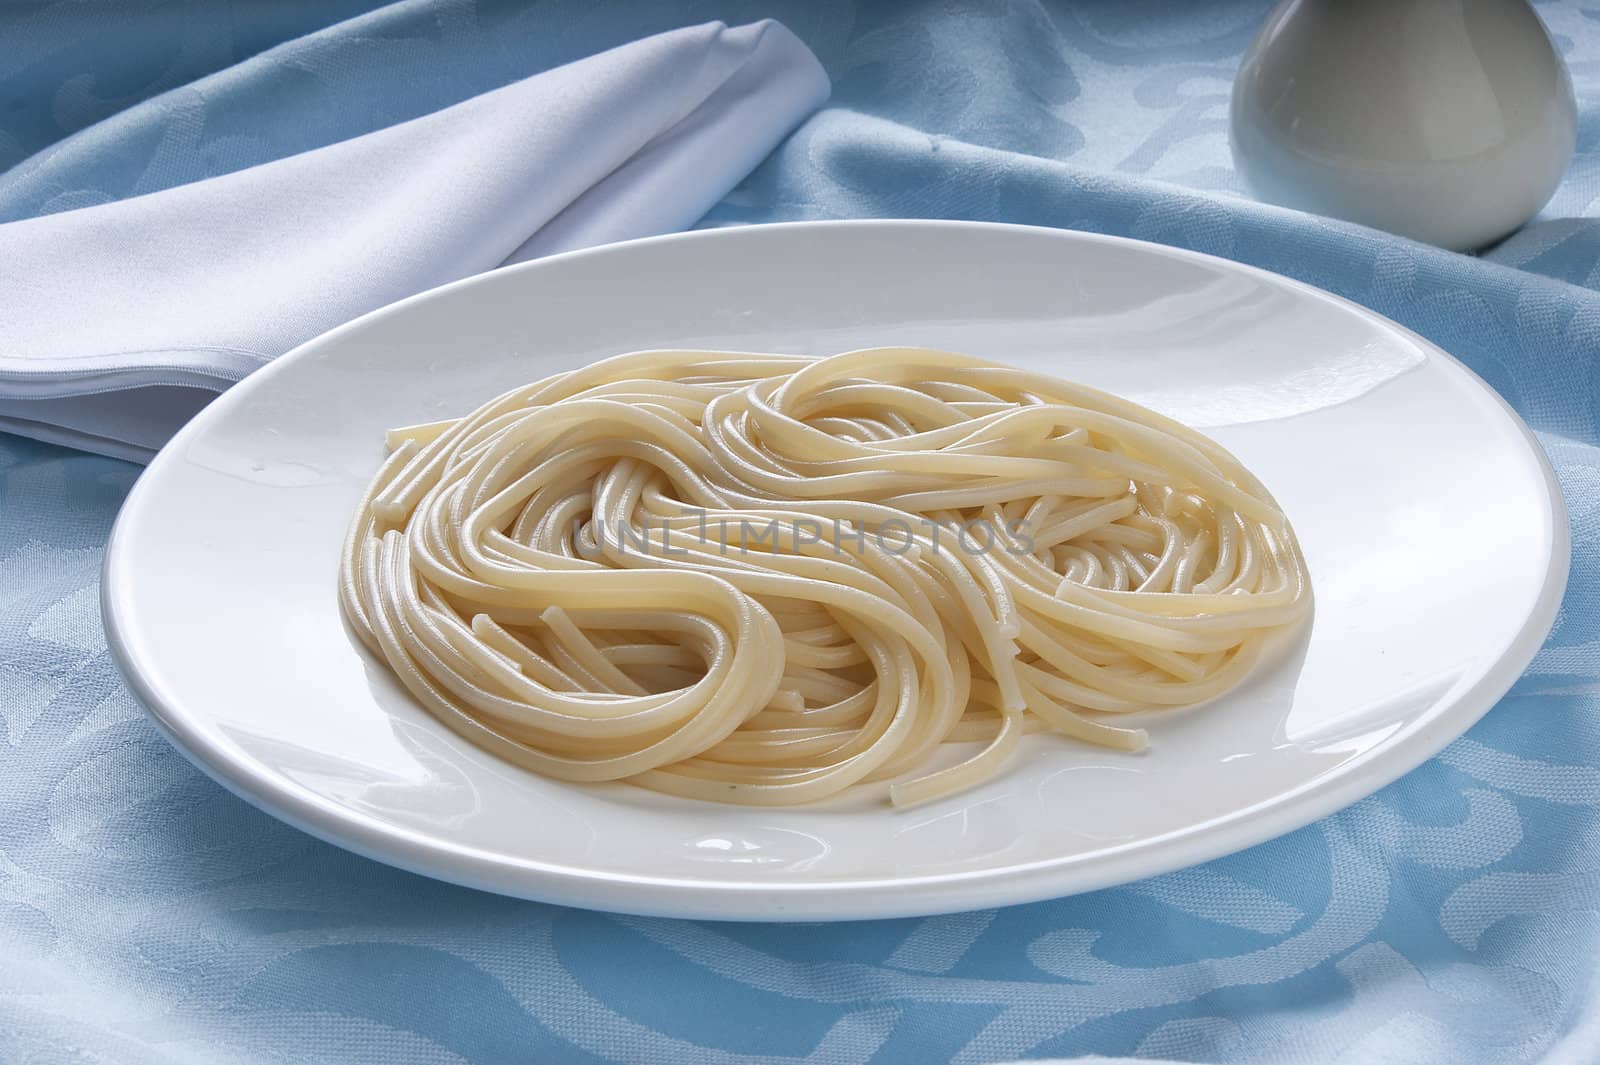 Plate with boiled spaghetti on the blue tablecloth